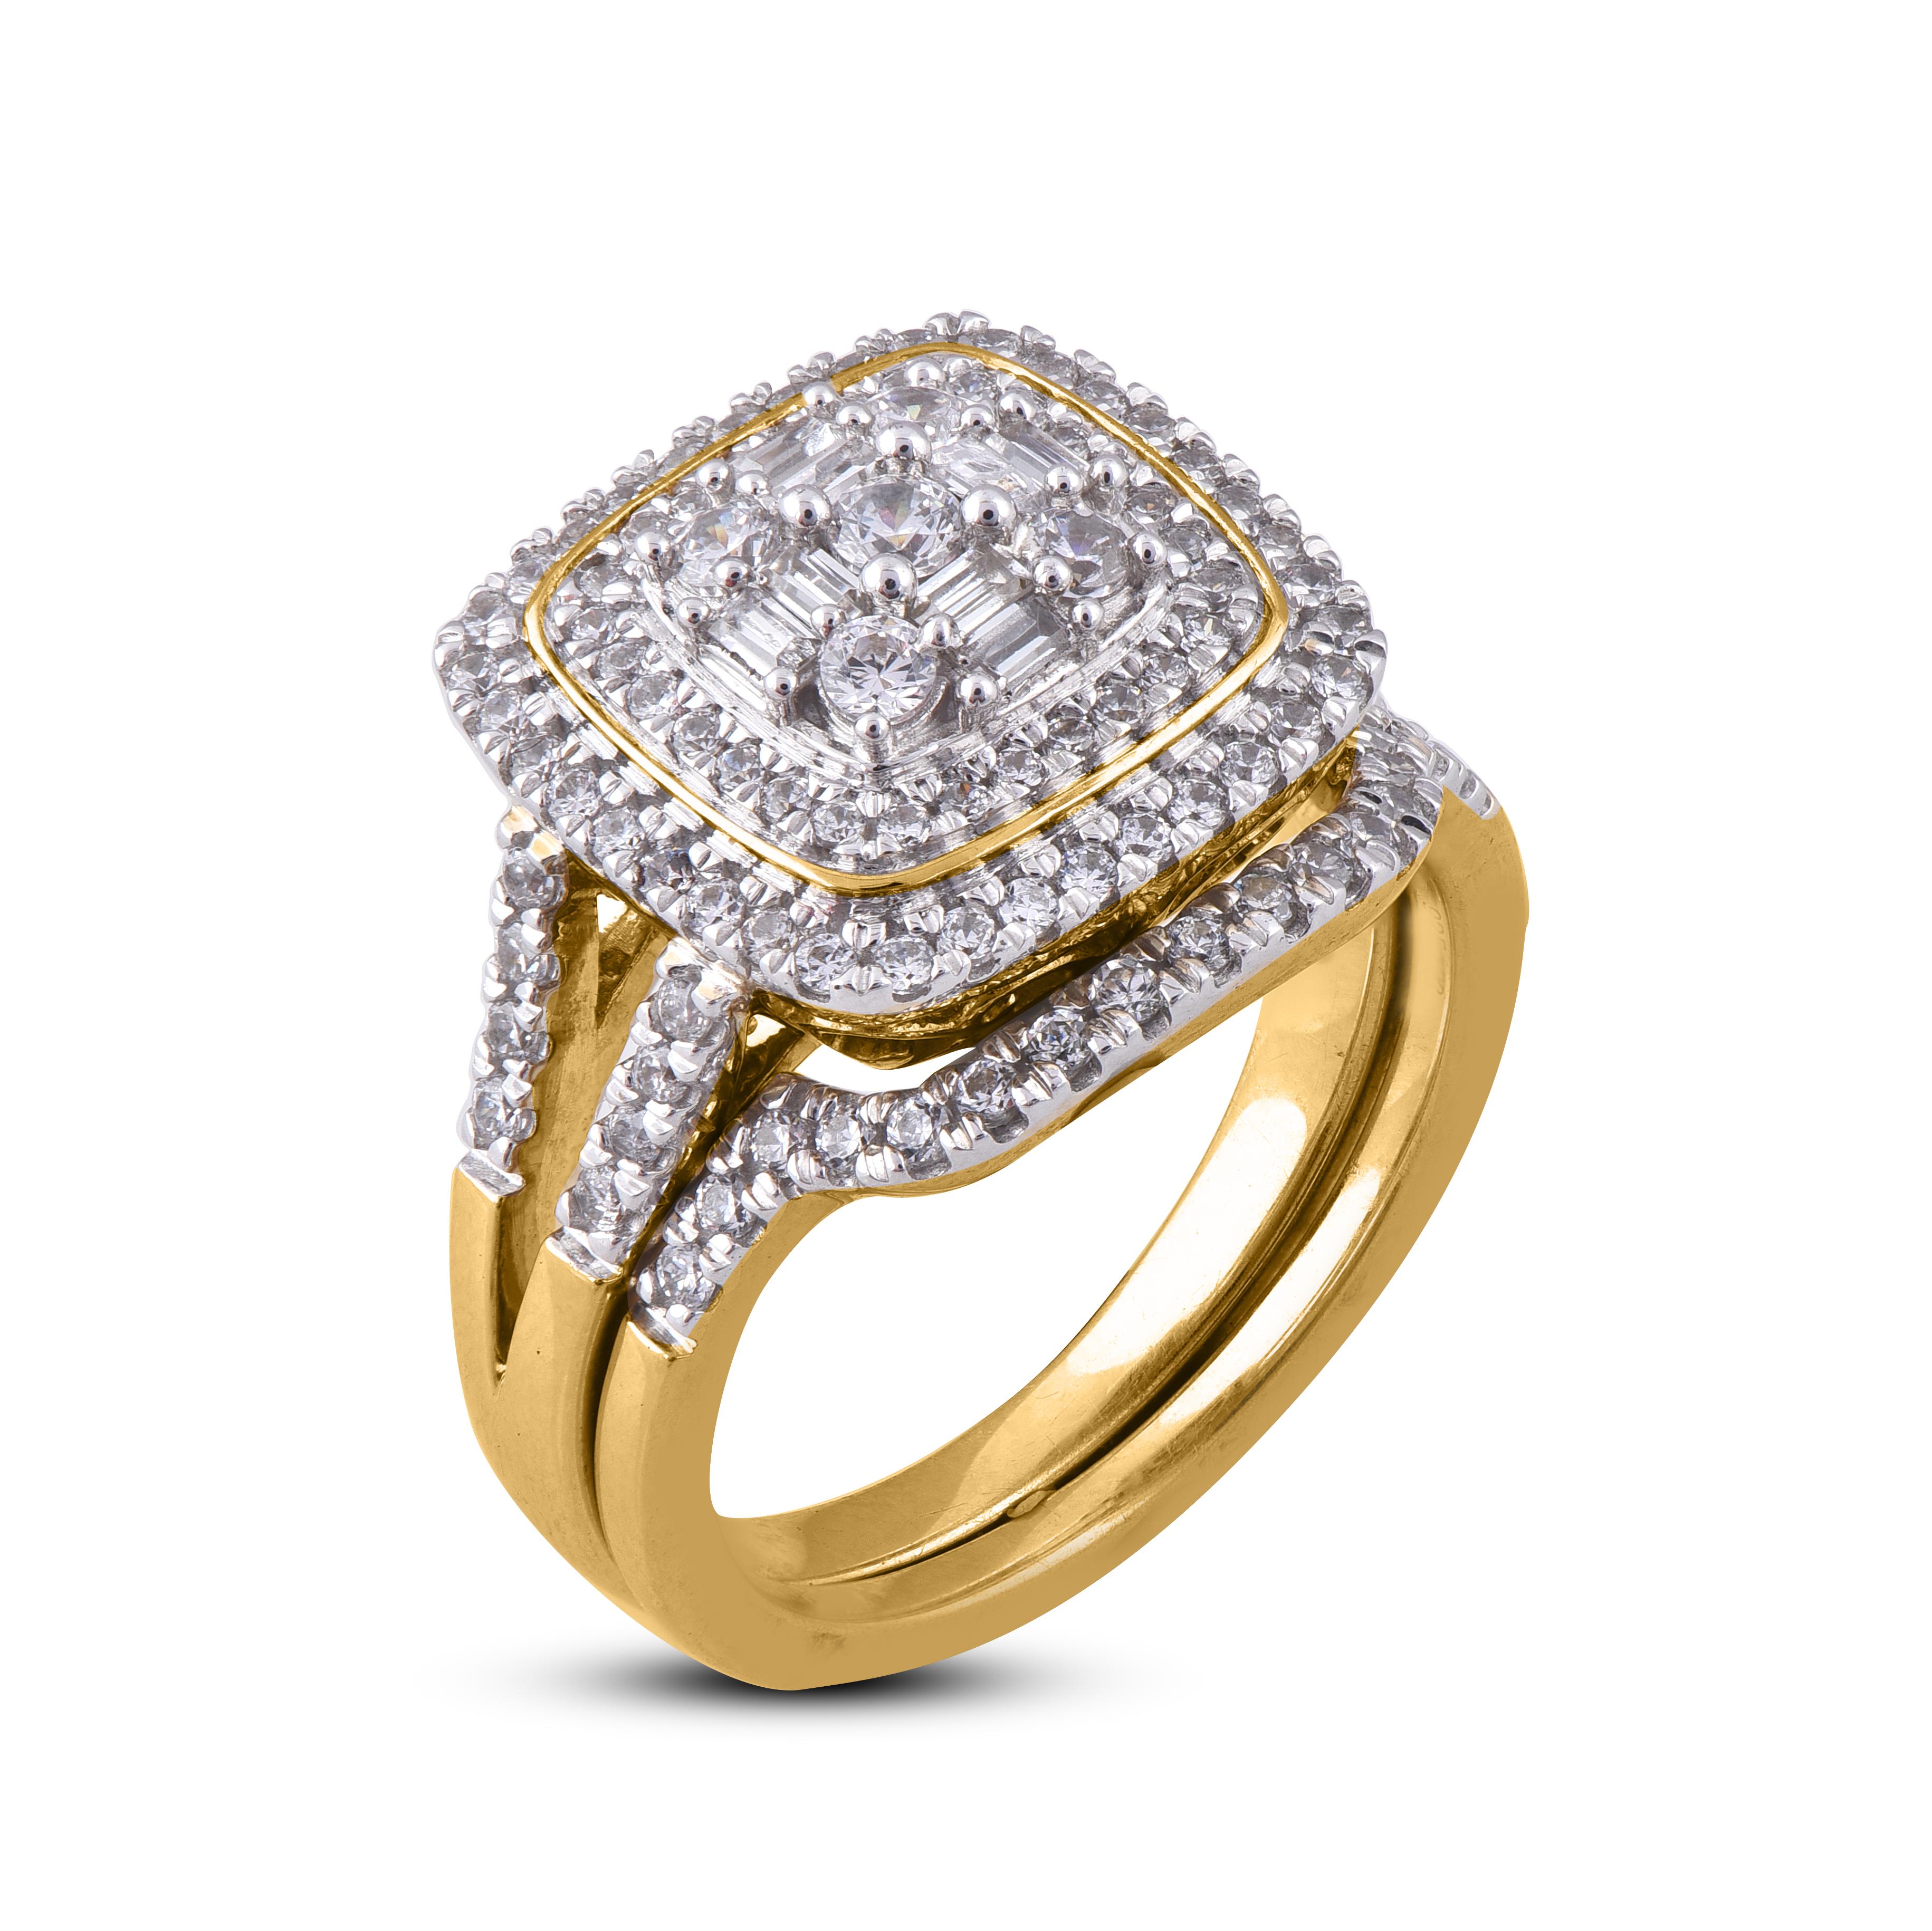 This Multi Diamond Wedding Band Ring is Accentuated with 102 round and 8 baguette diamonds beautifully set in prong setting and crafted in 14 Karat white gold. The total diamond weight is 1.00 Carat and H-I color I2 Clarity.
